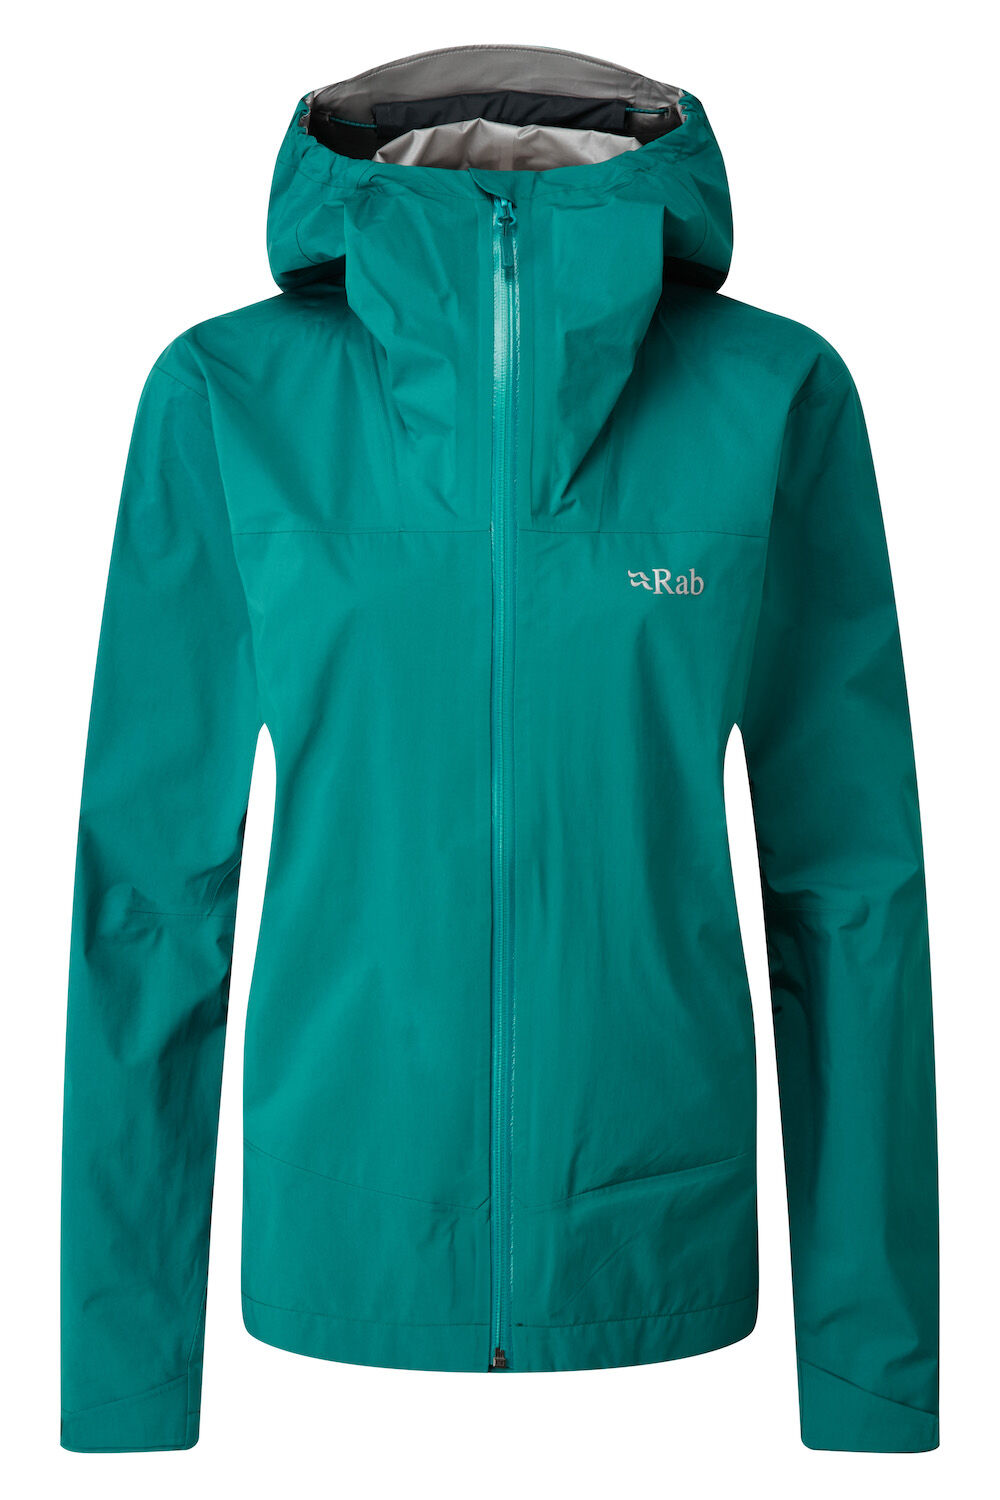 Rab Meridian Jacket - Chaqueta impermeable - Mujer